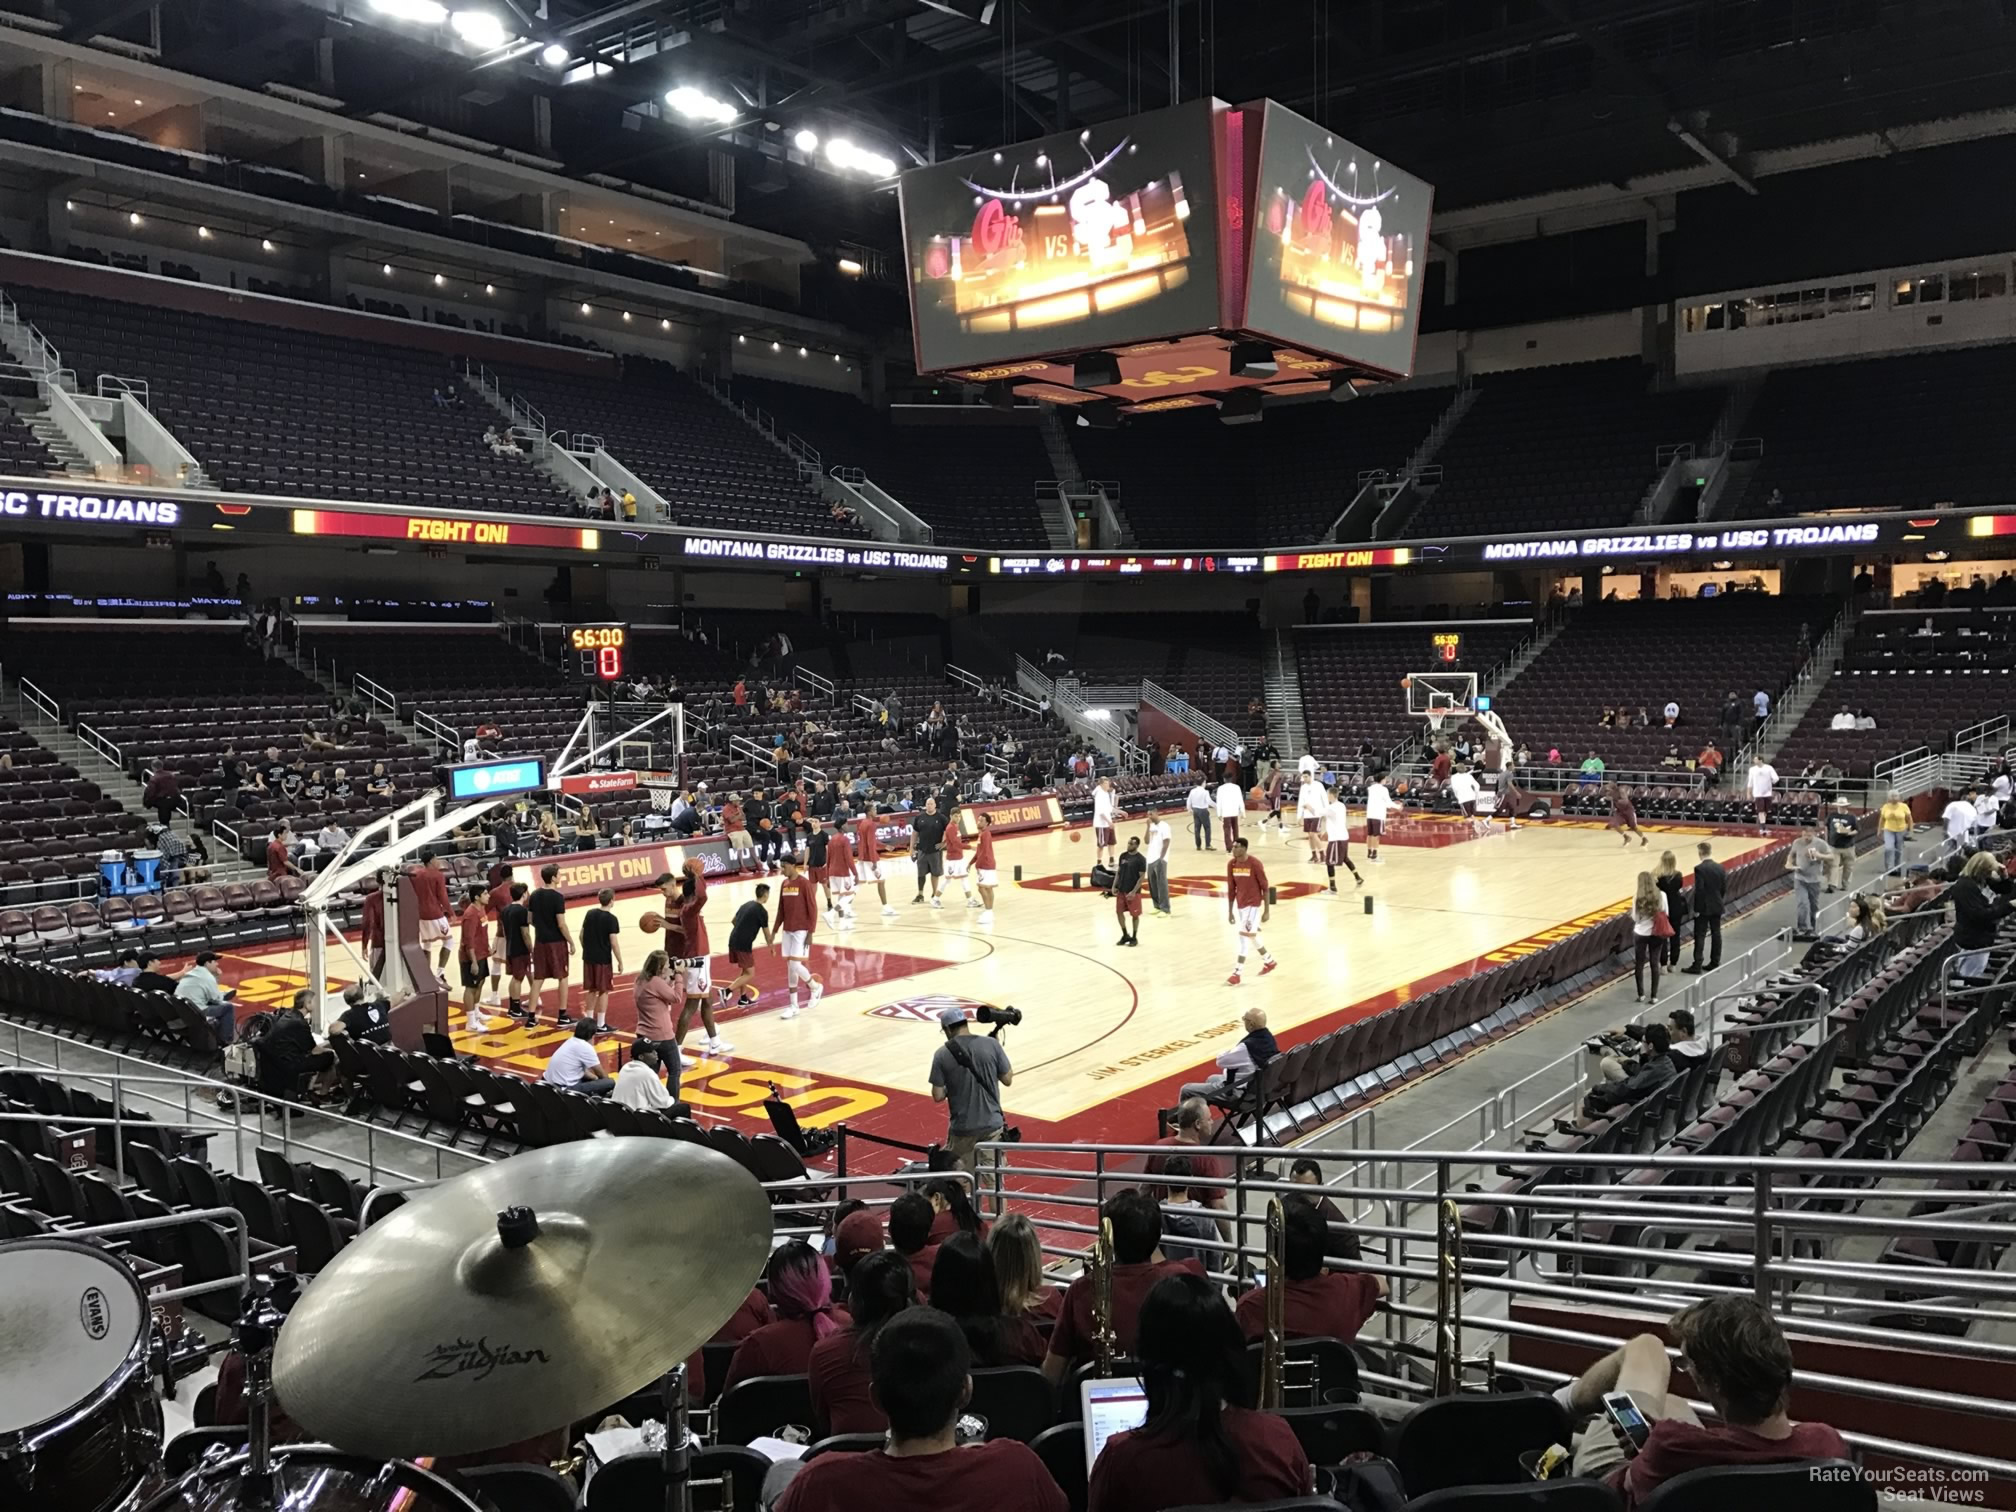 section 124, row 10 seat view  - galen center